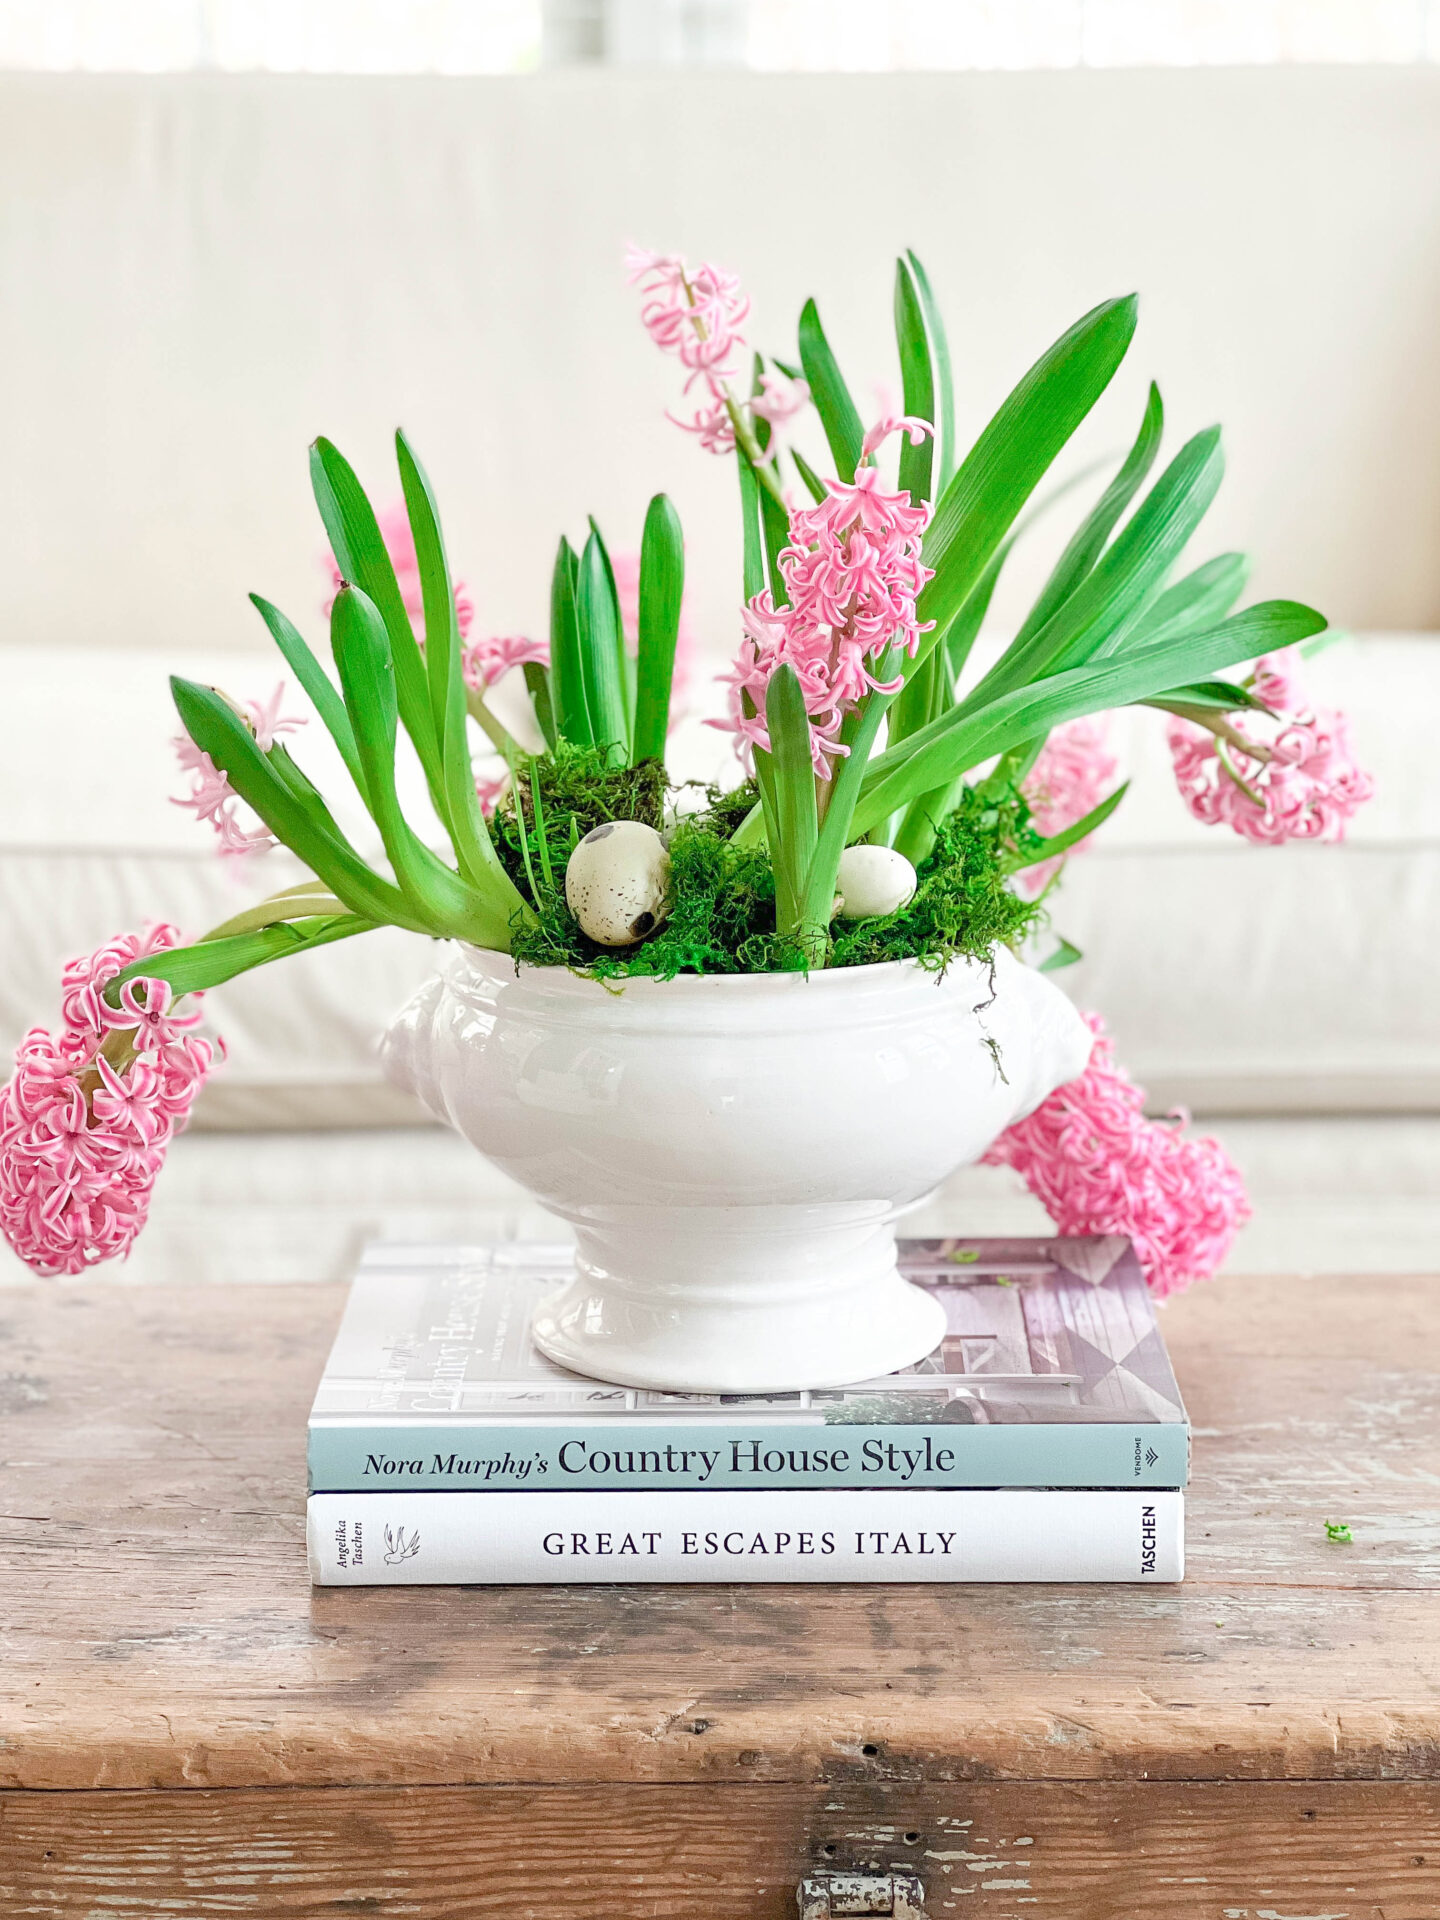 Hyacinth Bulbs in a Vintage Soup Tureen